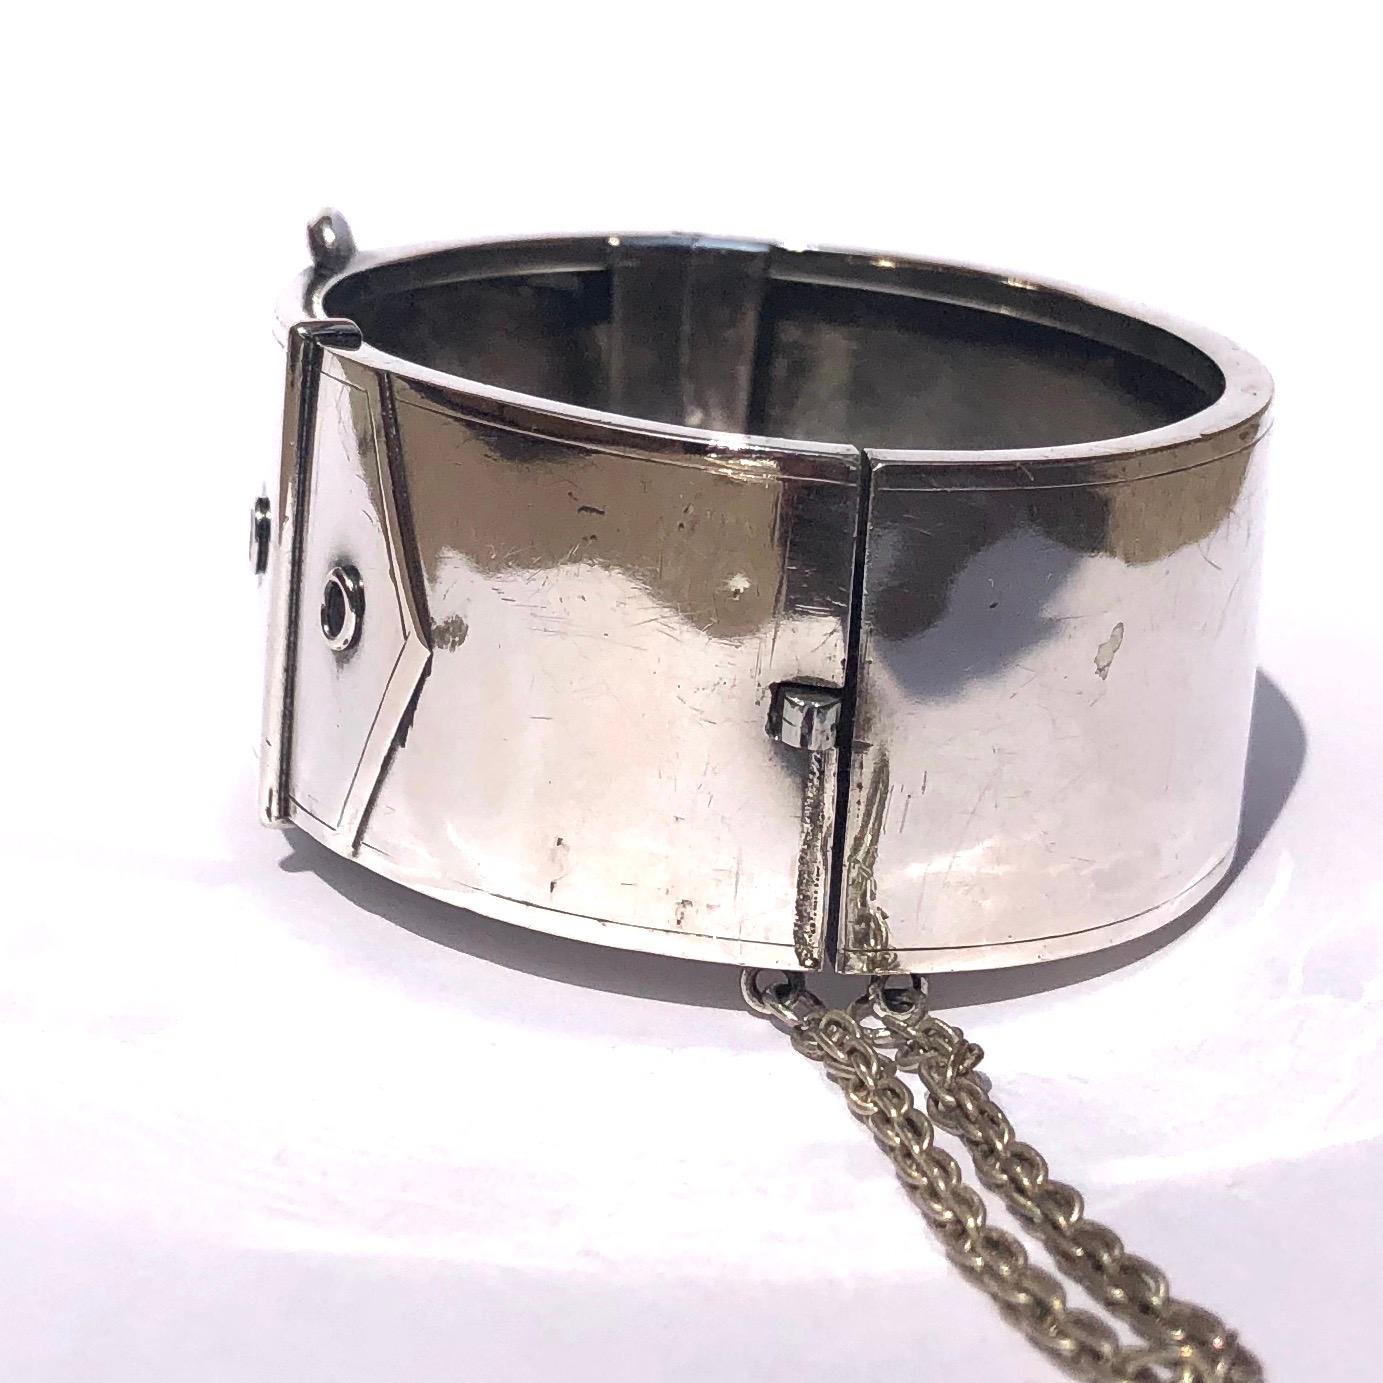 Tis wide glossy silver buckle bangle has a chunky and stylish look about it. The design of the buckle is simple yes gorgeous. 

Inner Diameter: 56mm
Bangle Width: 25mm 

Weight: 34.6g